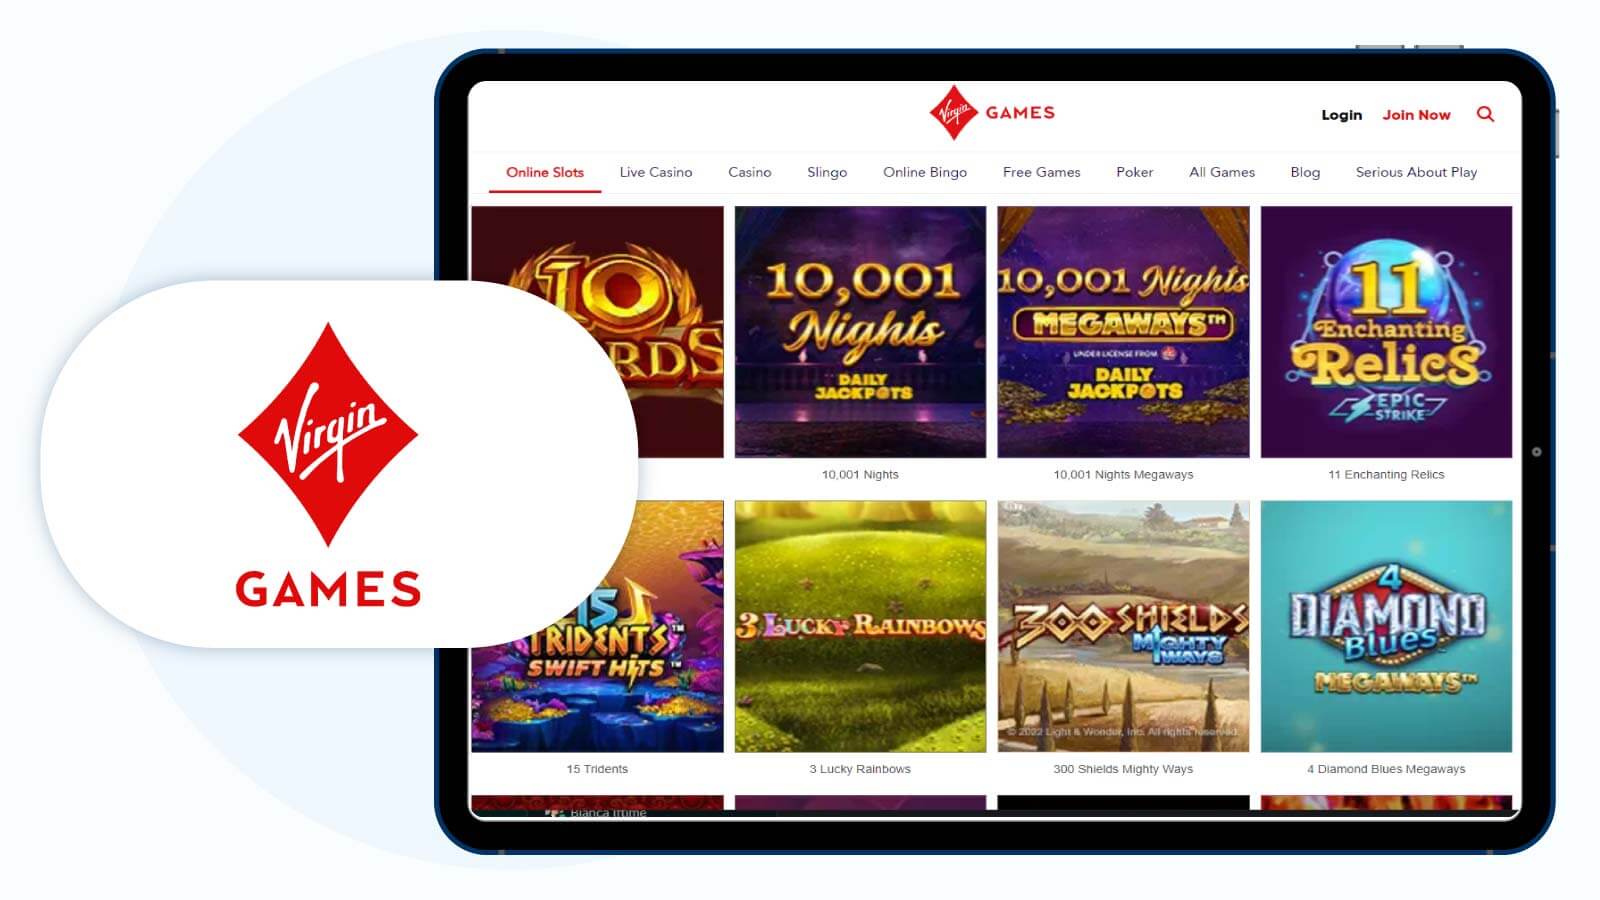 Virgin-Games-Best-Payout-Casino-for-No-Wagering-Slots-Bonuses